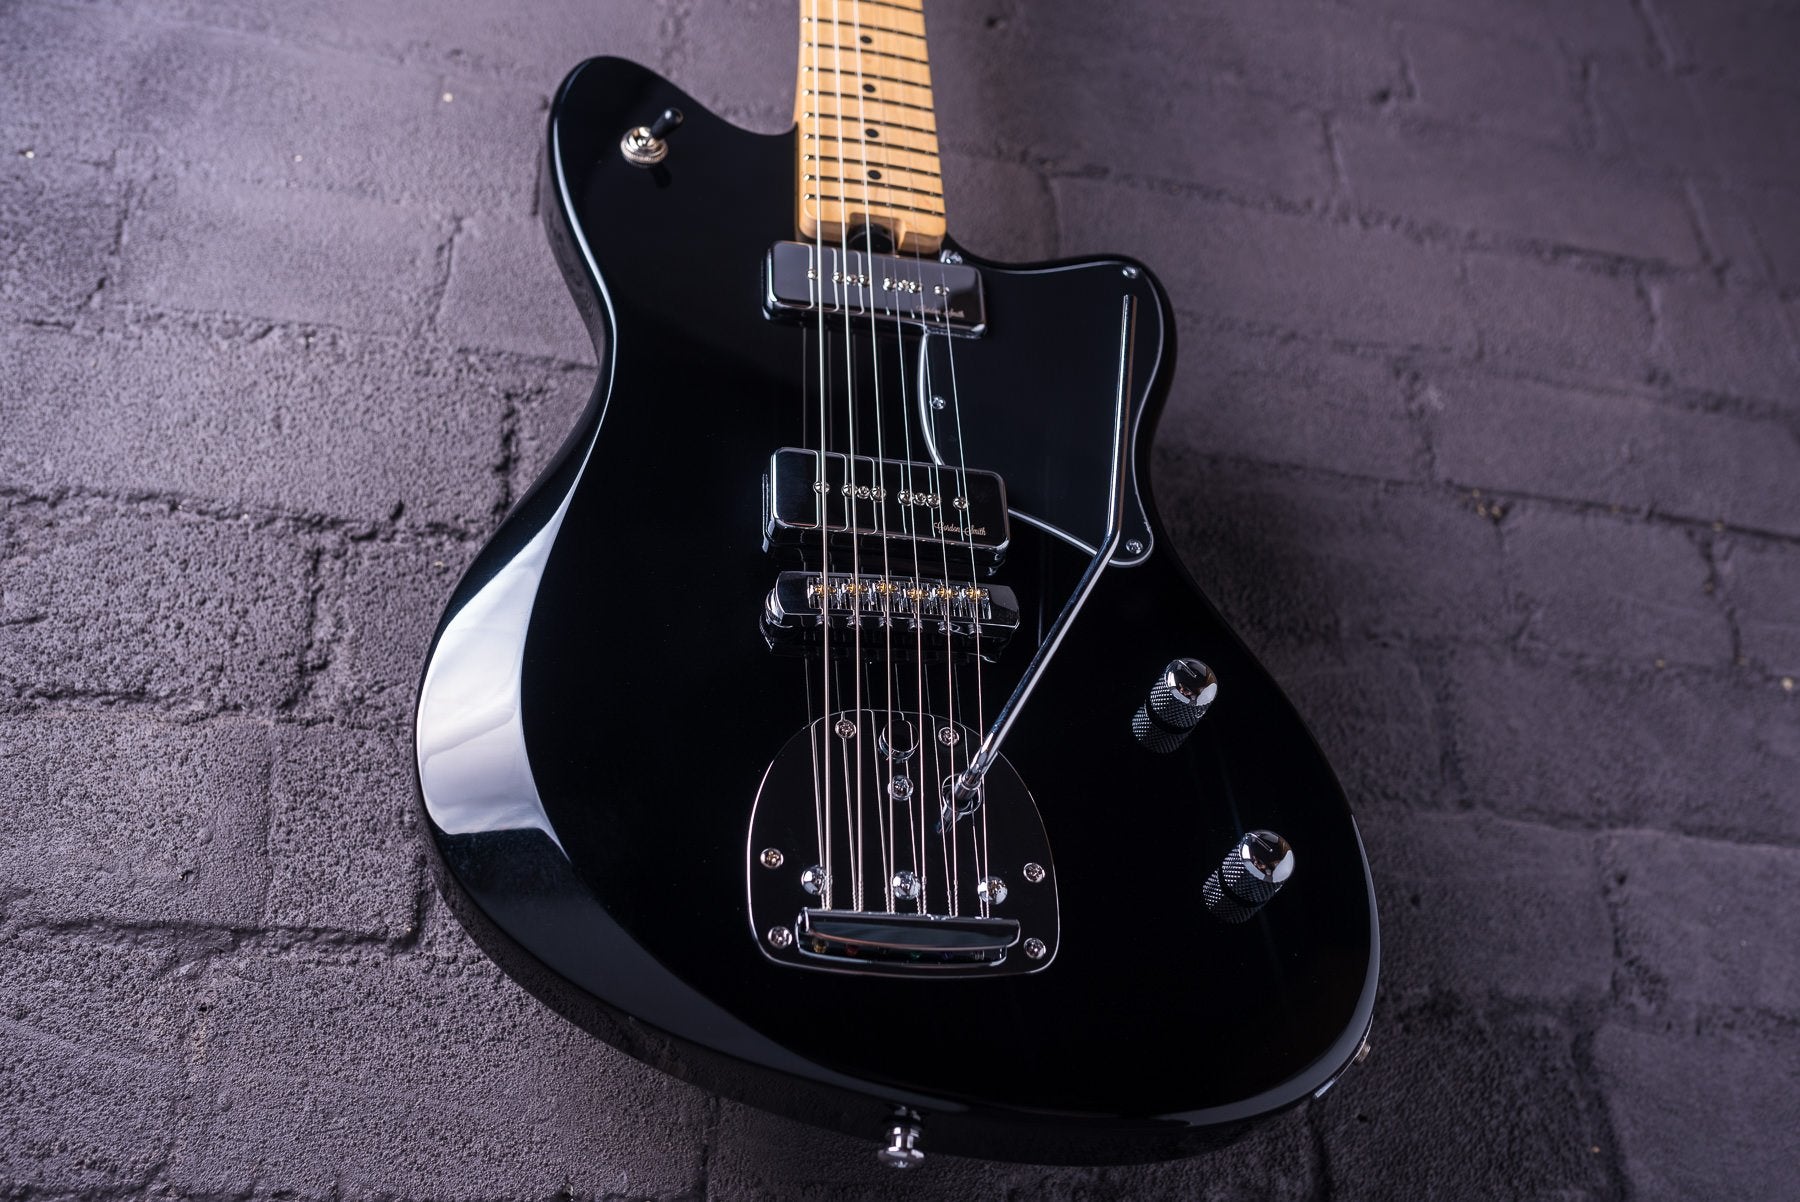 Gordon Smith The Gatsby Launch Edition 2021 Jet Black, Electric Guitar for sale at Richards Guitars.